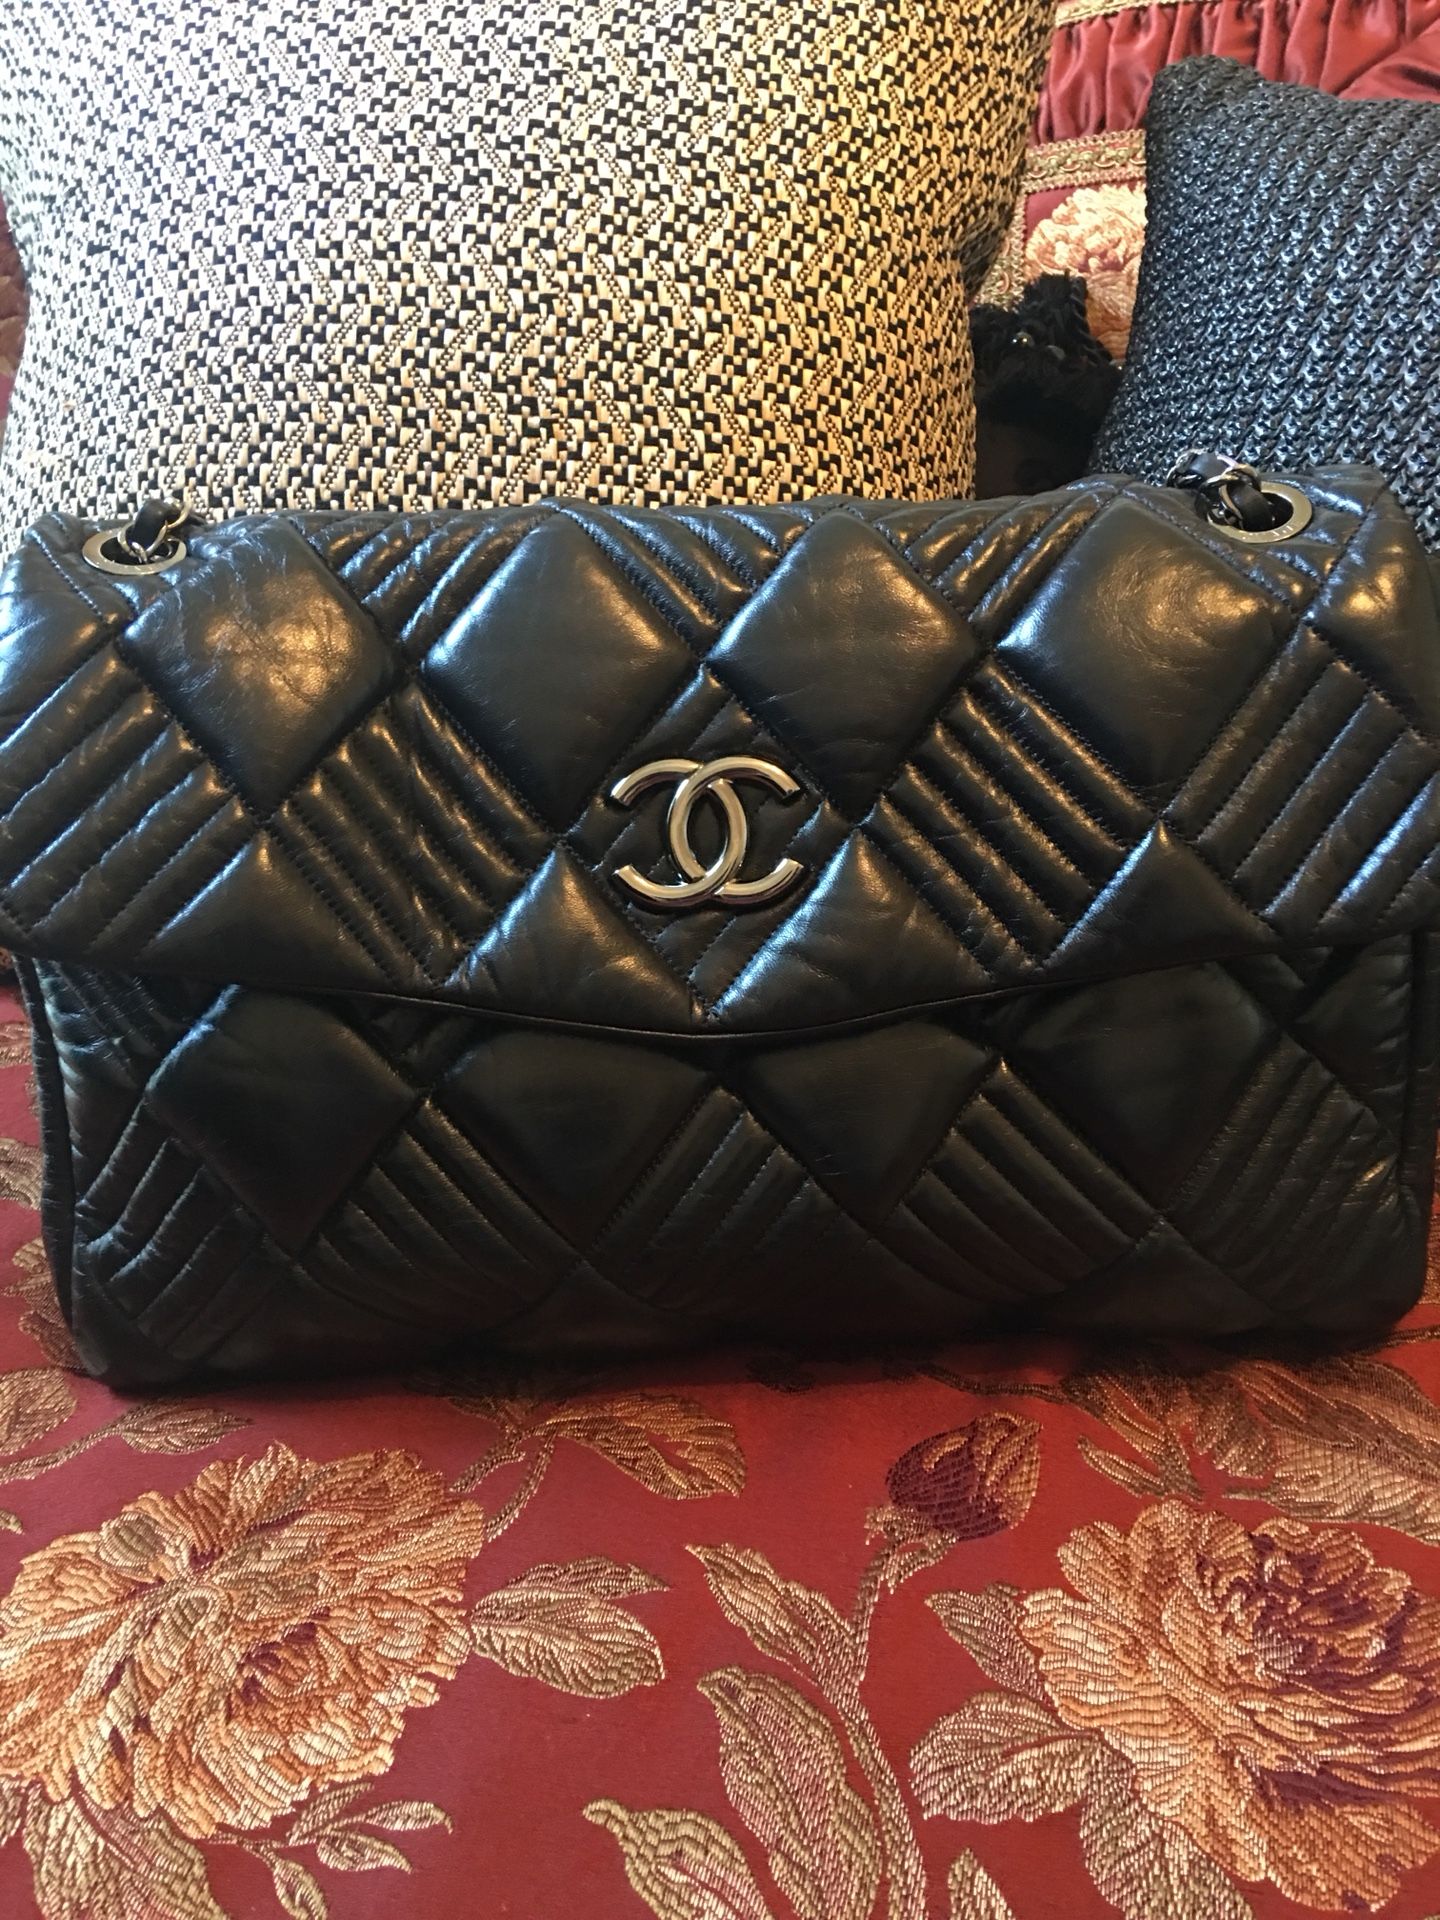 Authentic Chanel Bubble lamb skin large flap-Authentication certificate included